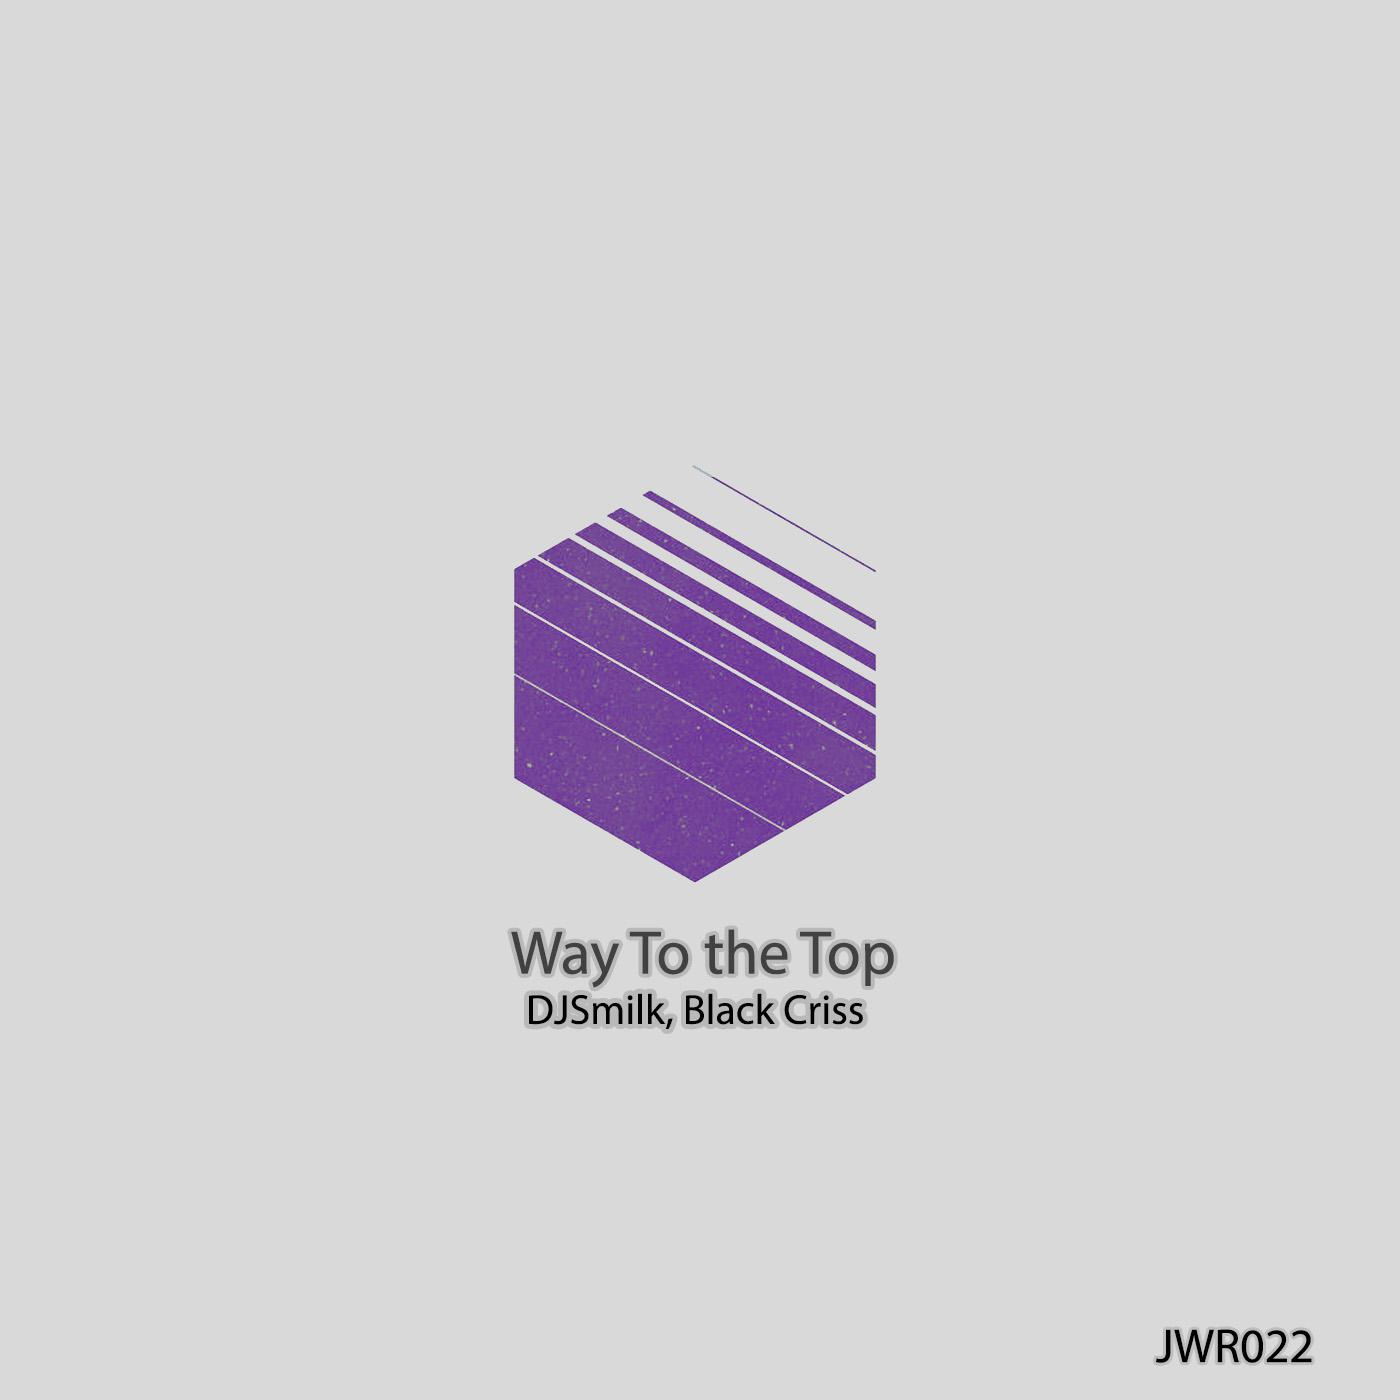 Way To the Top